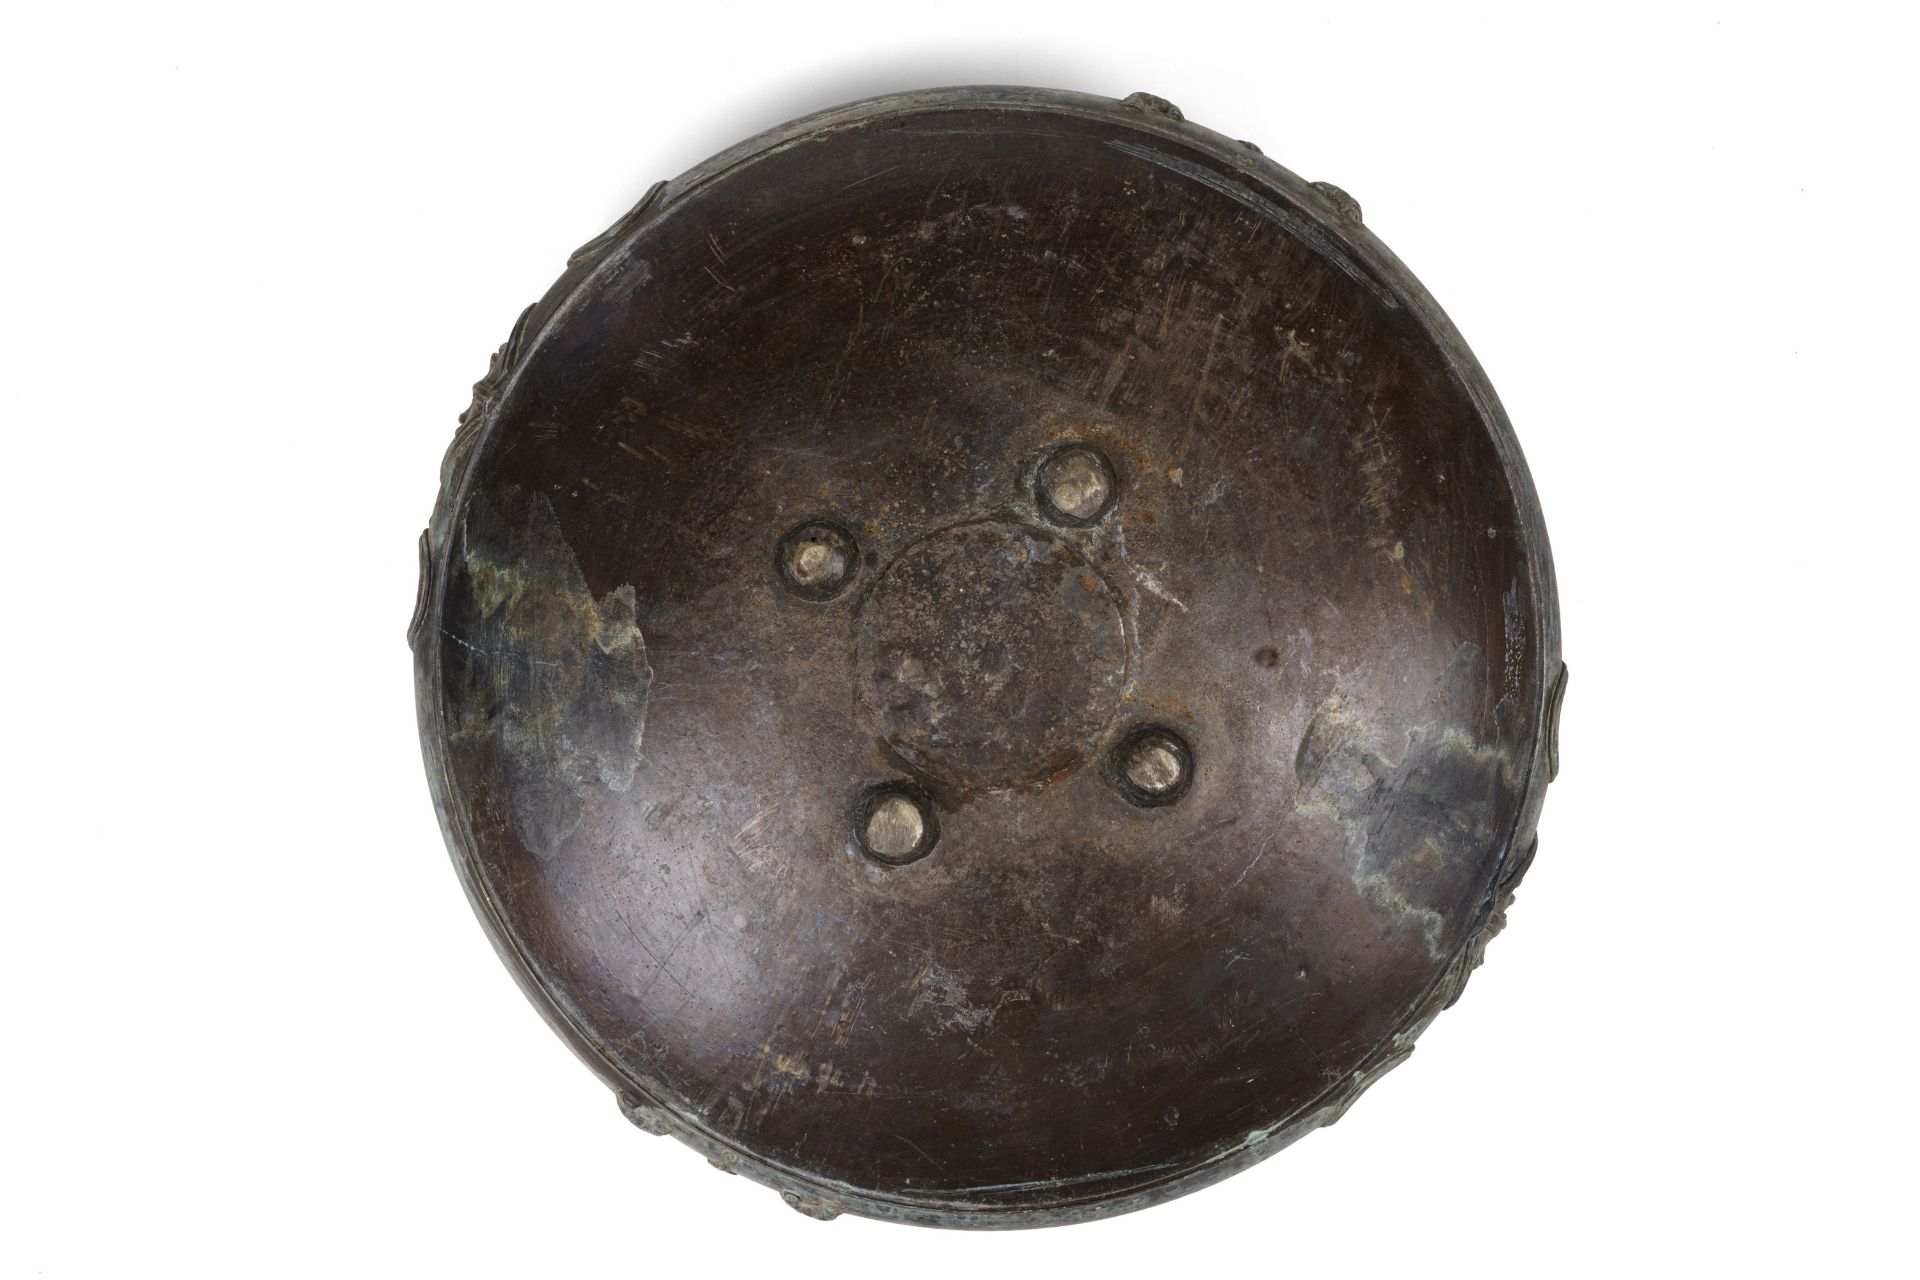 Large temple bowl - Uruli. Kerala, South India. Probably 19th century / early 20th century. 20t... - Image 13 of 14